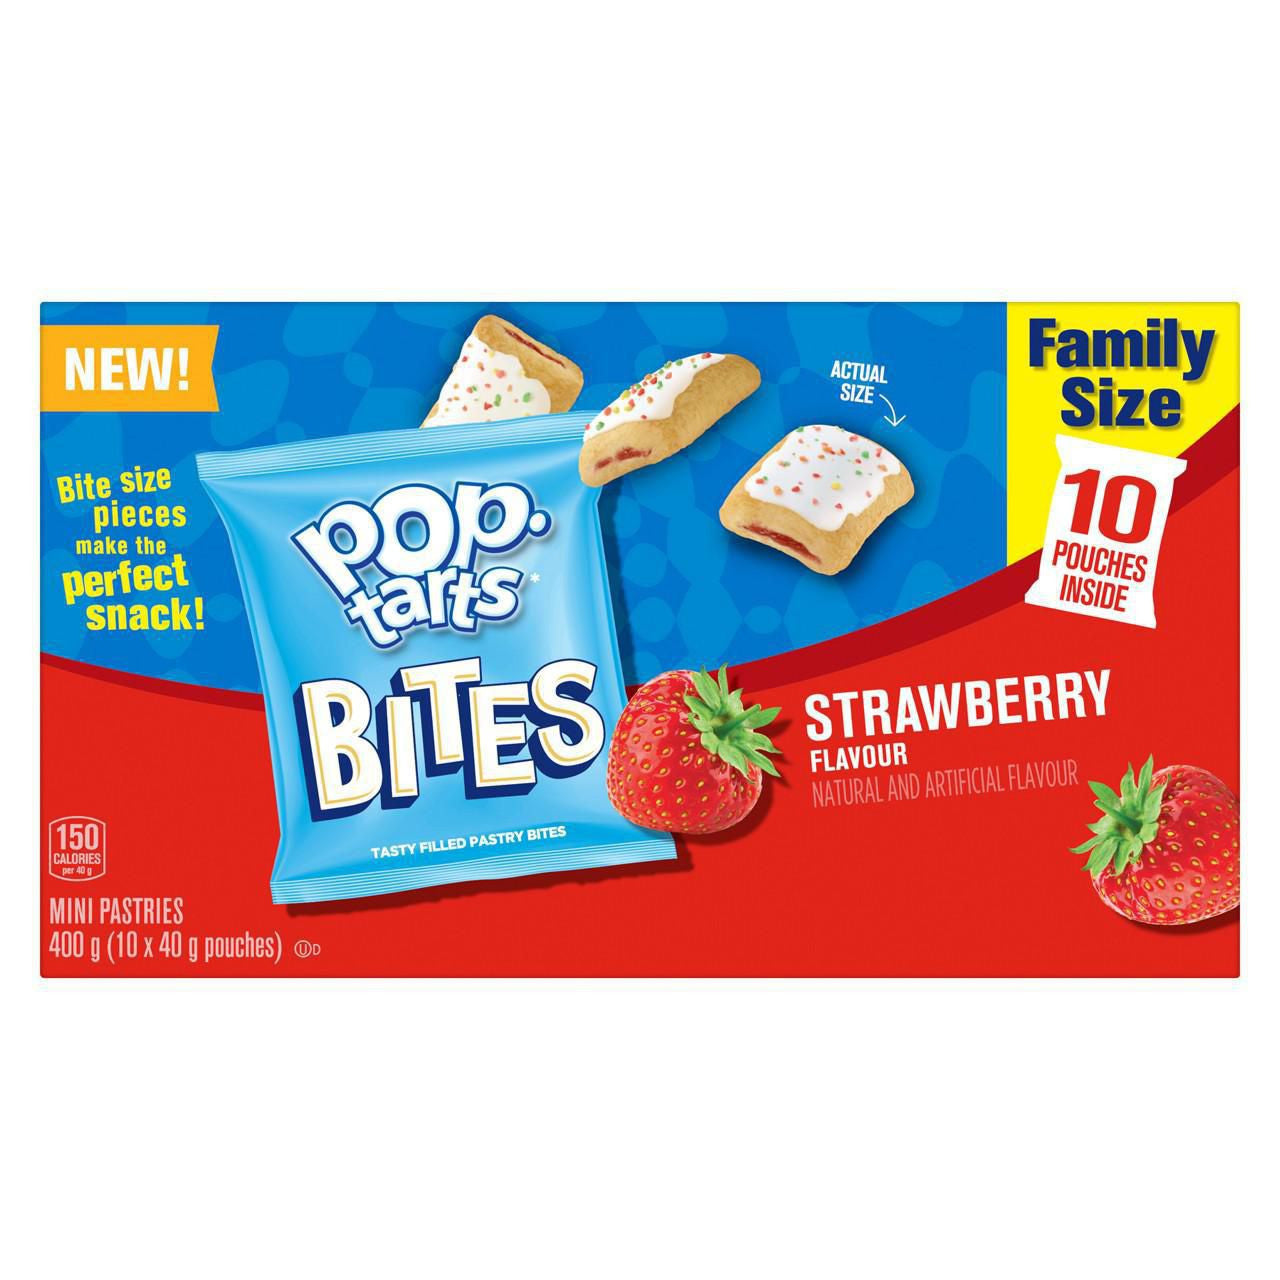 Kellogg's Pop-Tarts Bites, Mini Pastries Strawberry Flavour, 10 pouches, 400g/14.1 oz., {Imported from Canada}